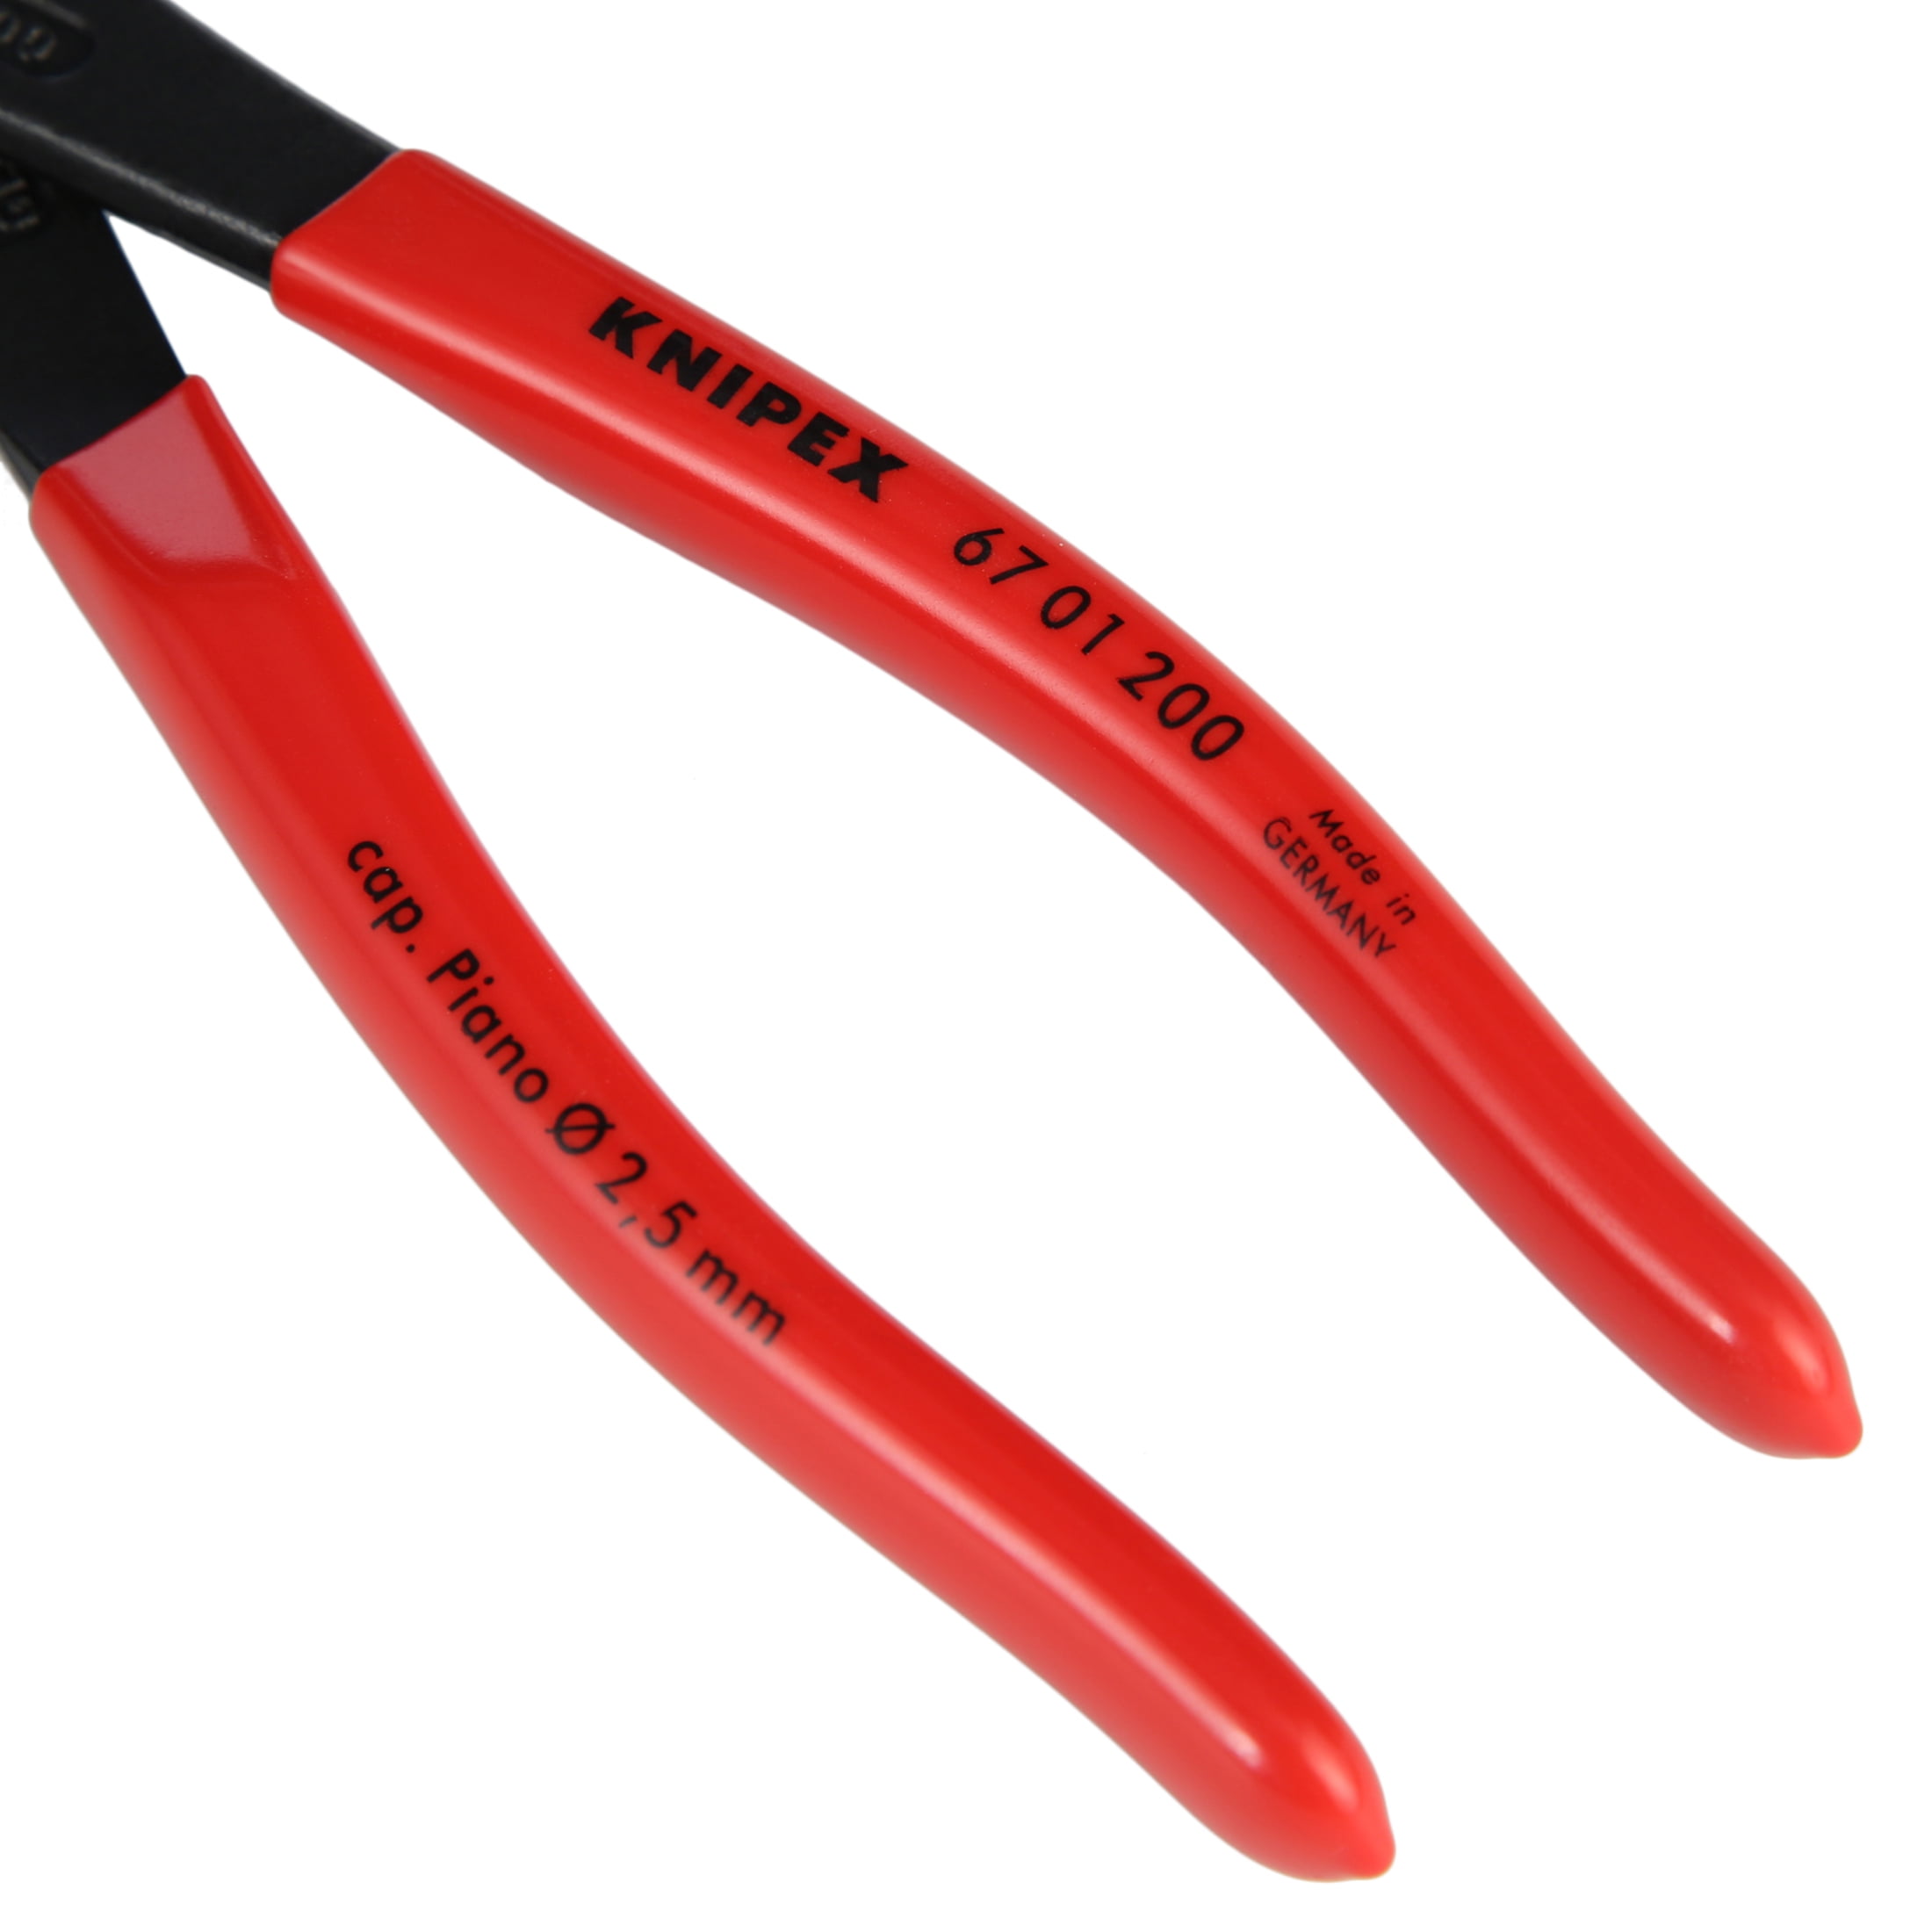 Knipex 6101200 8-Inch High Leverage End Cutters Bolt Cutters 